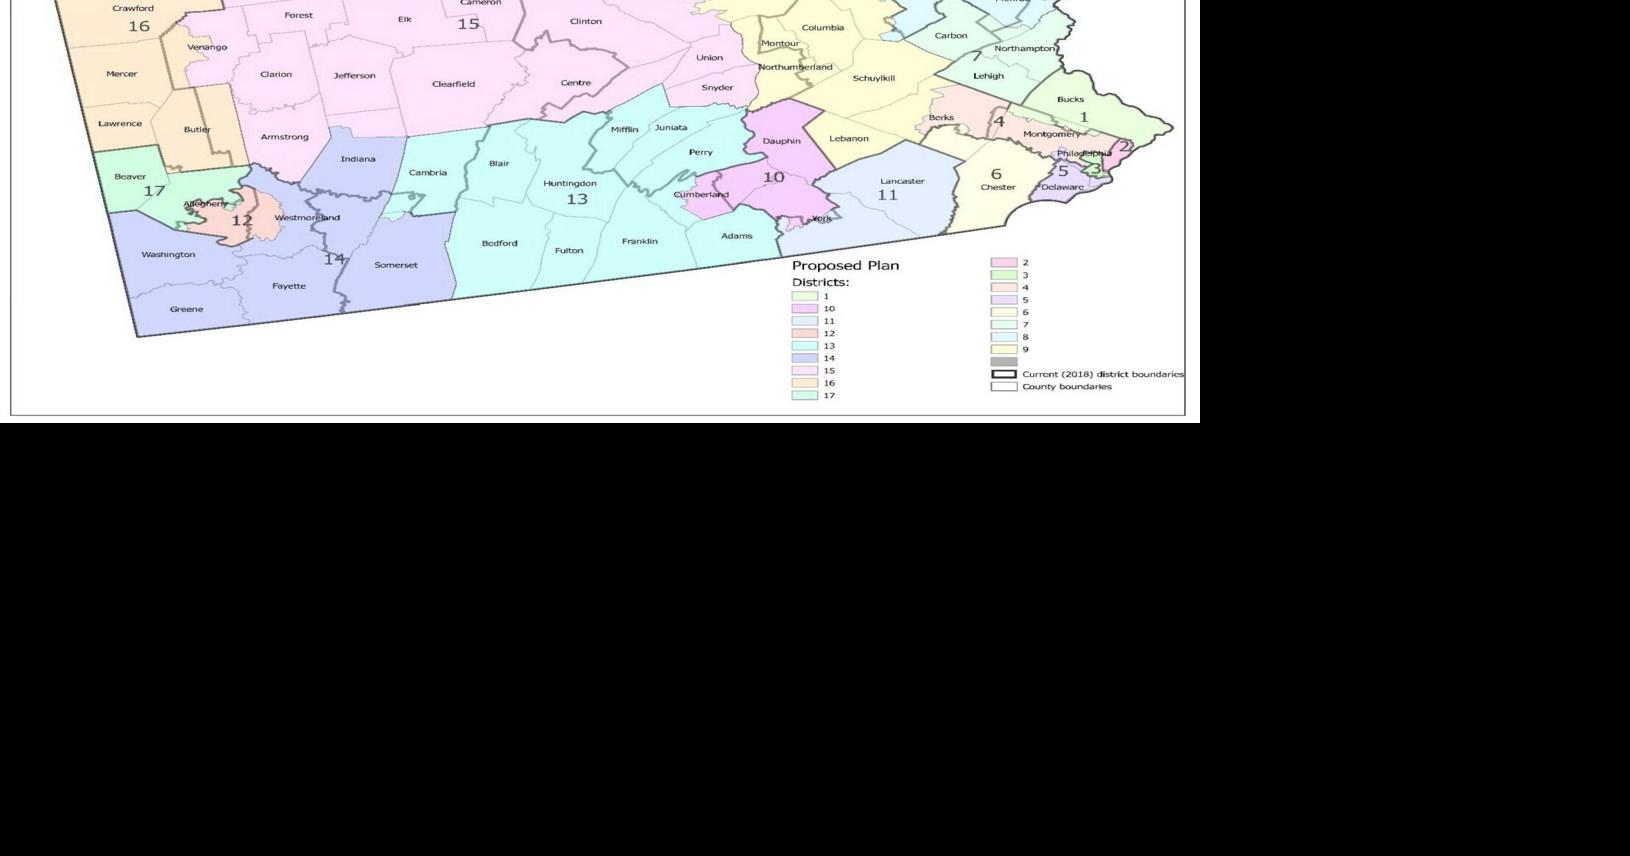 Pennsylvania high court picks new map of congressional districts